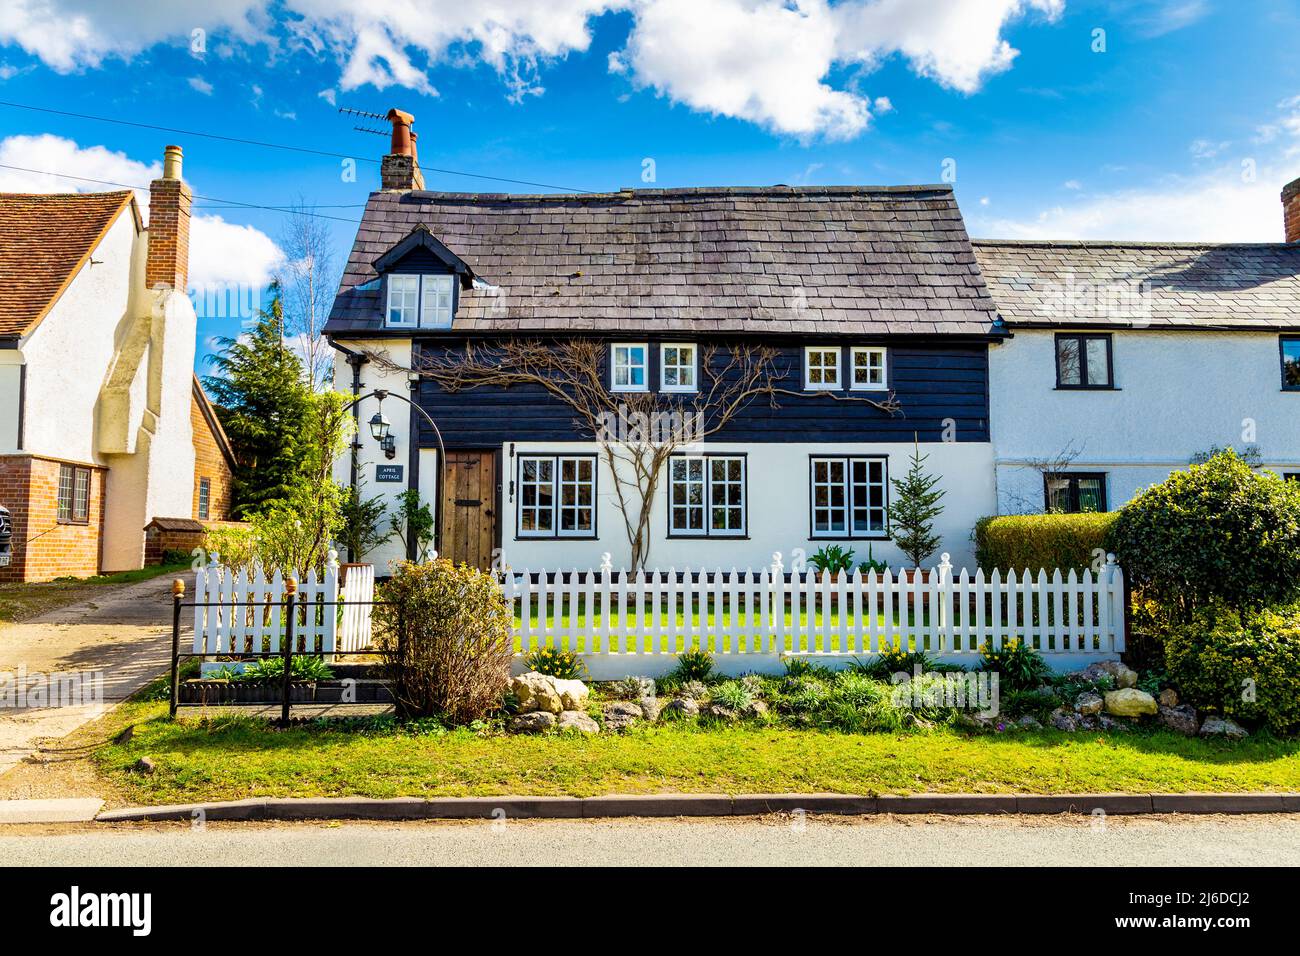 Charming cottage with white picket fence in the village of Great Wymondley, Hertfordshire, UK Stock Photo